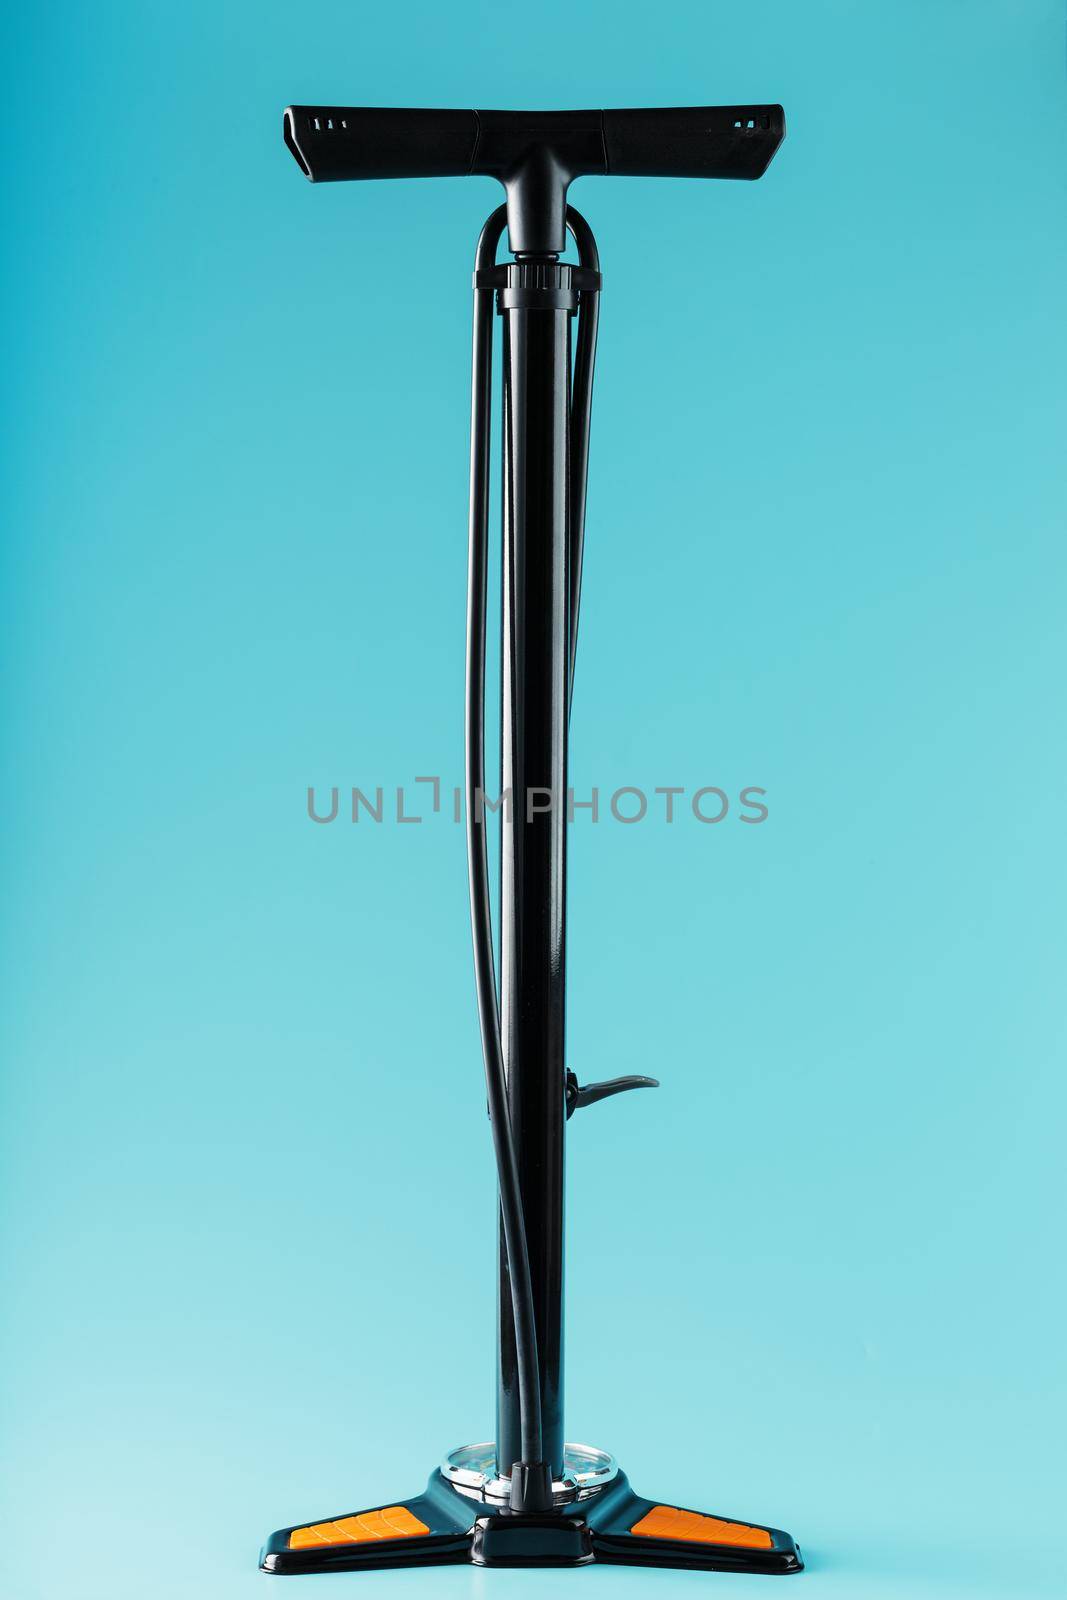 Black bicycle manual air pump for pumping wheels on a blue background by AlexGrec